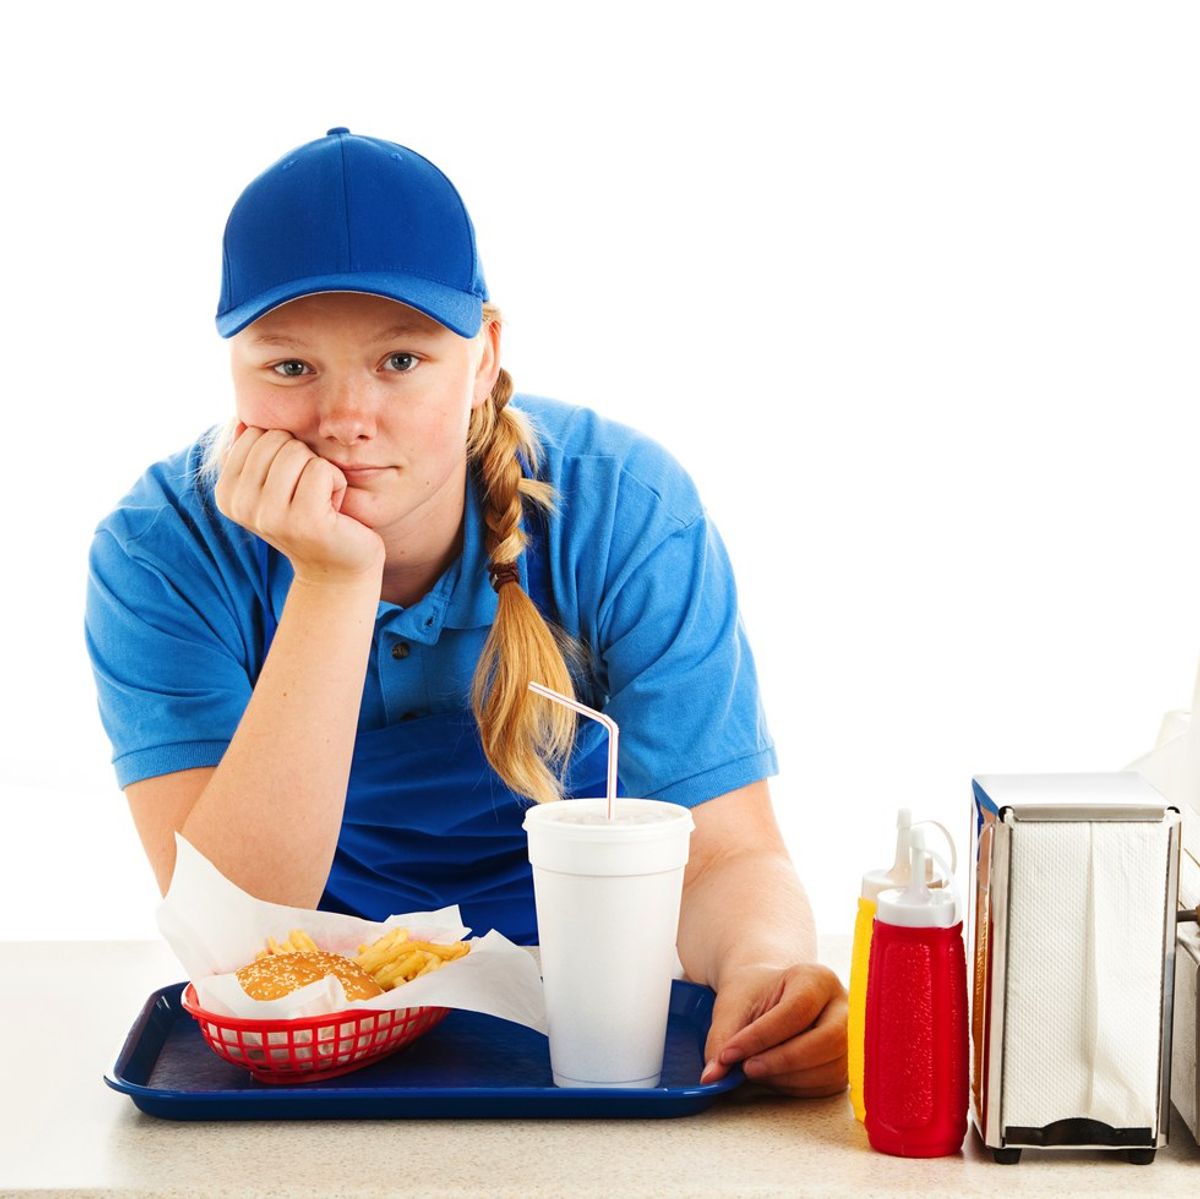 Confessions Of A Fast Food Employee